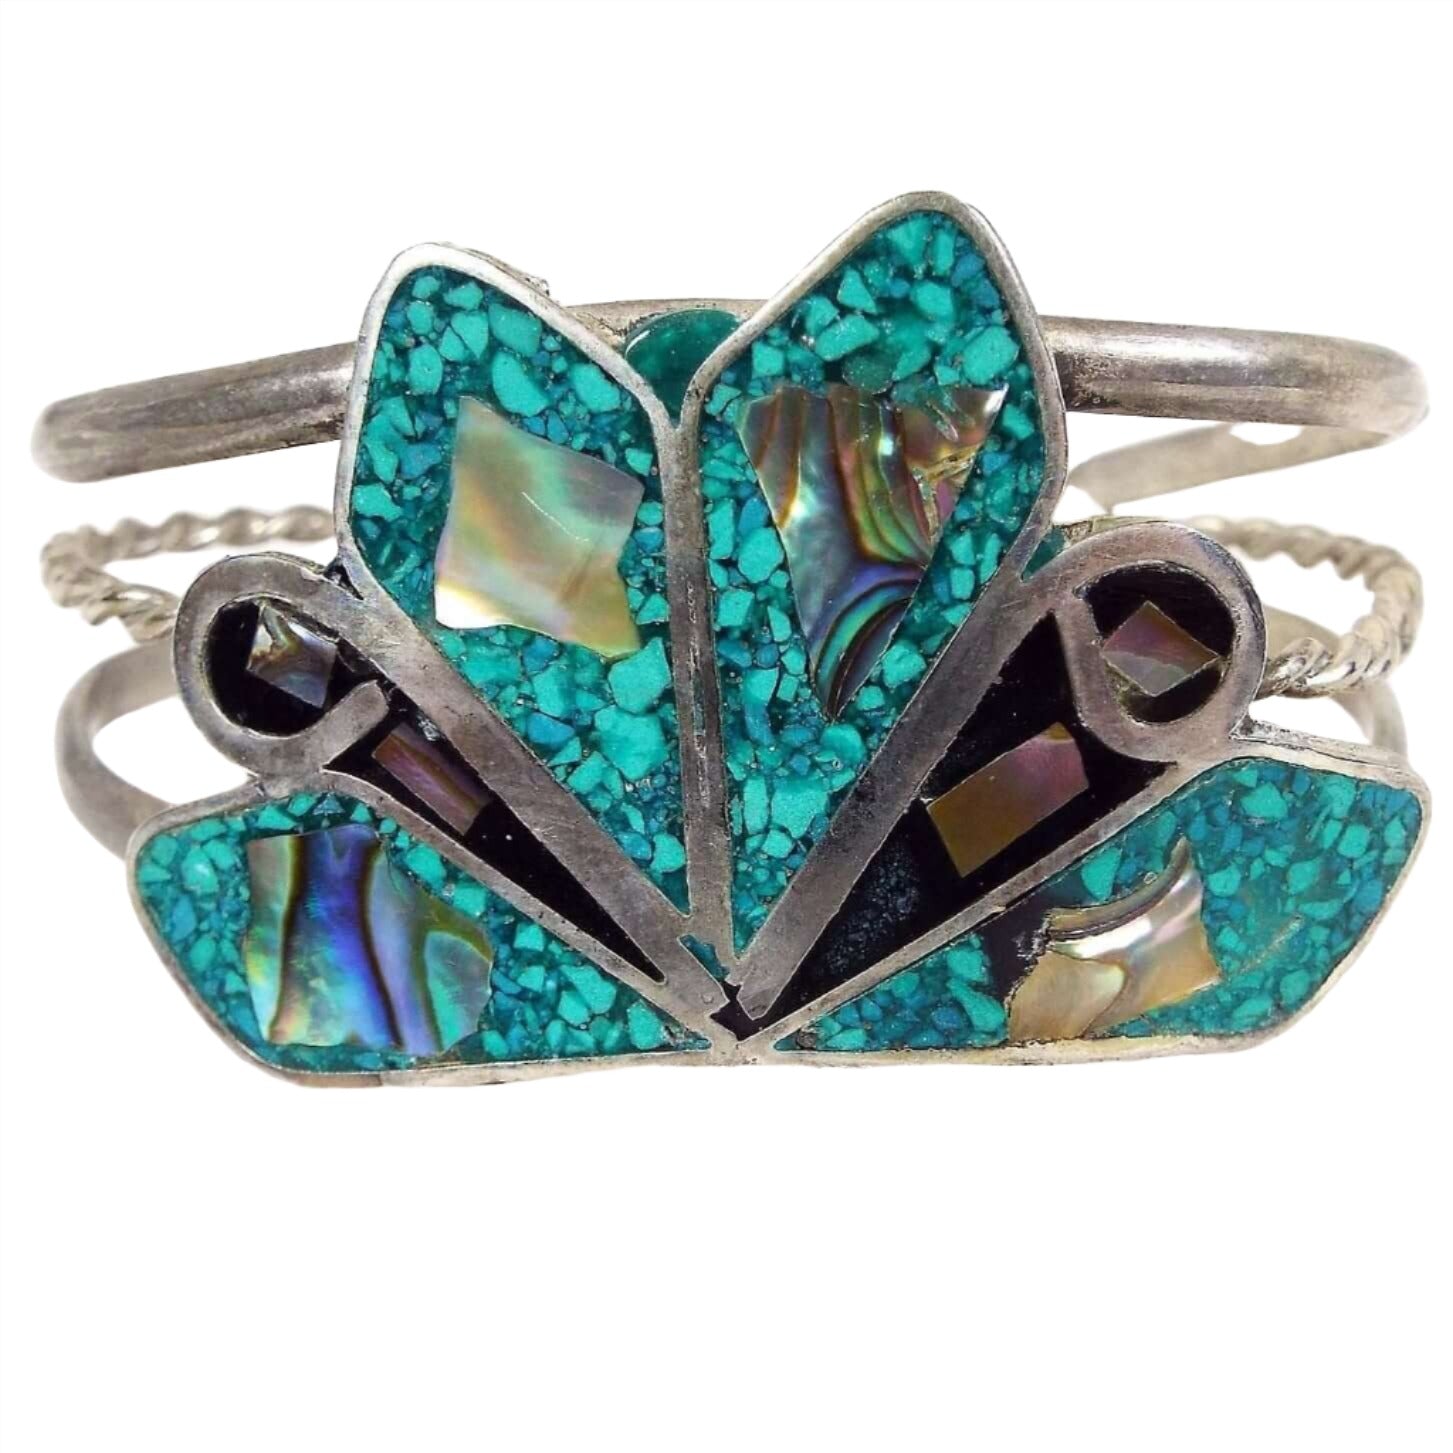 Front view of the retro vintage cuff bracelet. It is a wider silver tone bracelet with three curved bands to form the cuff. The top and bottom are rounded and the middle is thinner twisted wire. On the very top of the bracelet is a large area with angled teardops with small ends pointing inwards. Four of the larger teardrop shapes have tiny inlaid turquoise chips and a piece of inlaid abalone shell. The smaller ones have a curve of metal, black resin, and two small pieces of abalone shell. 